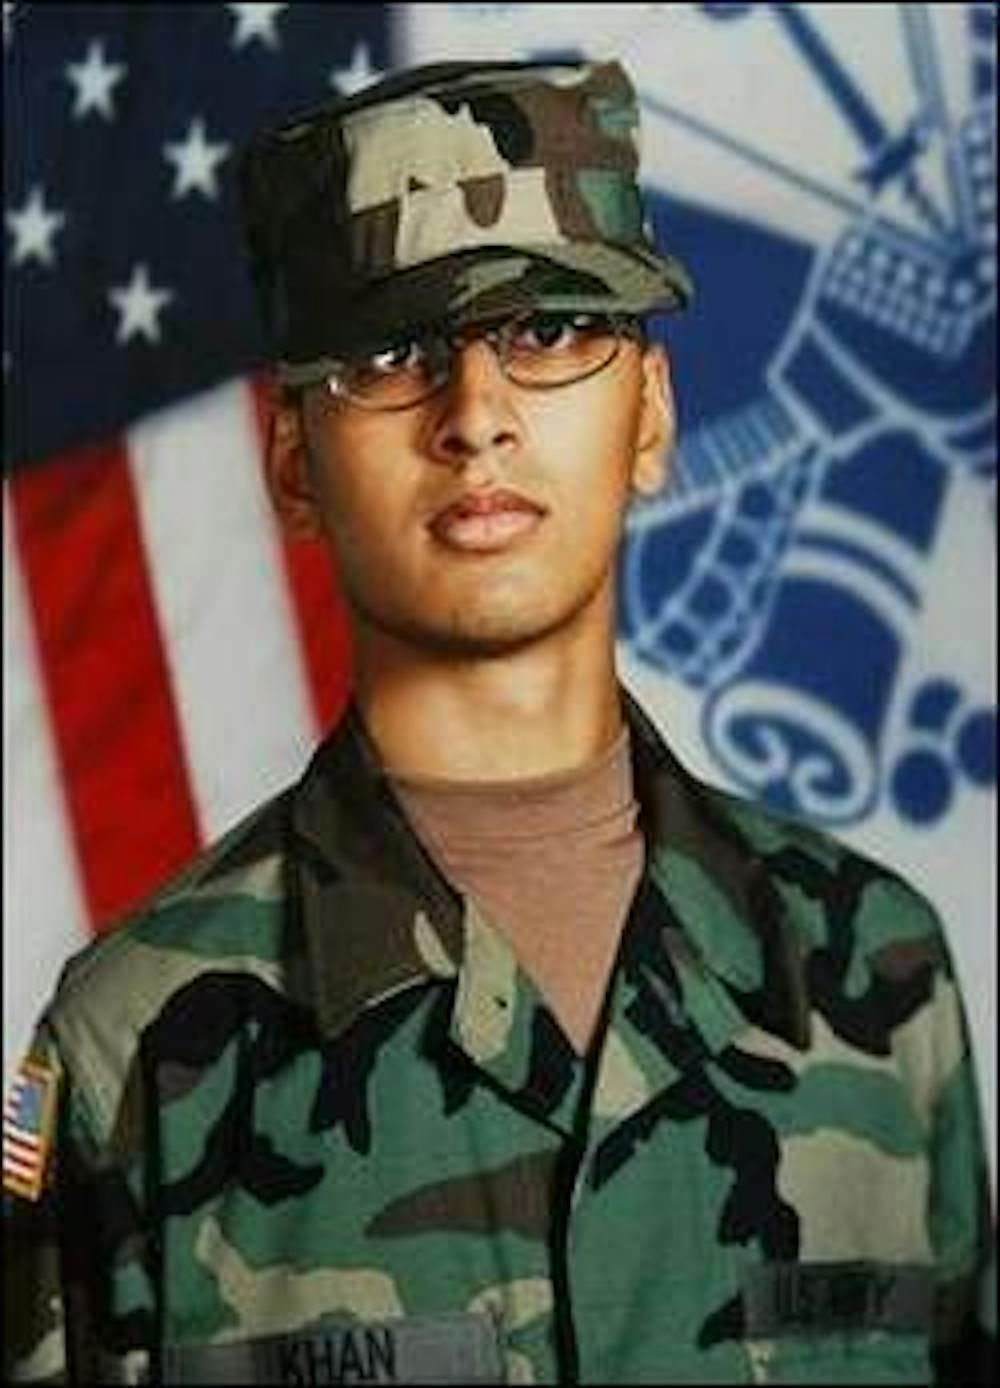 Kareem Rashad Sultan Khan died serving the United States. He was a Muslim. Courtesy of findgrave.com